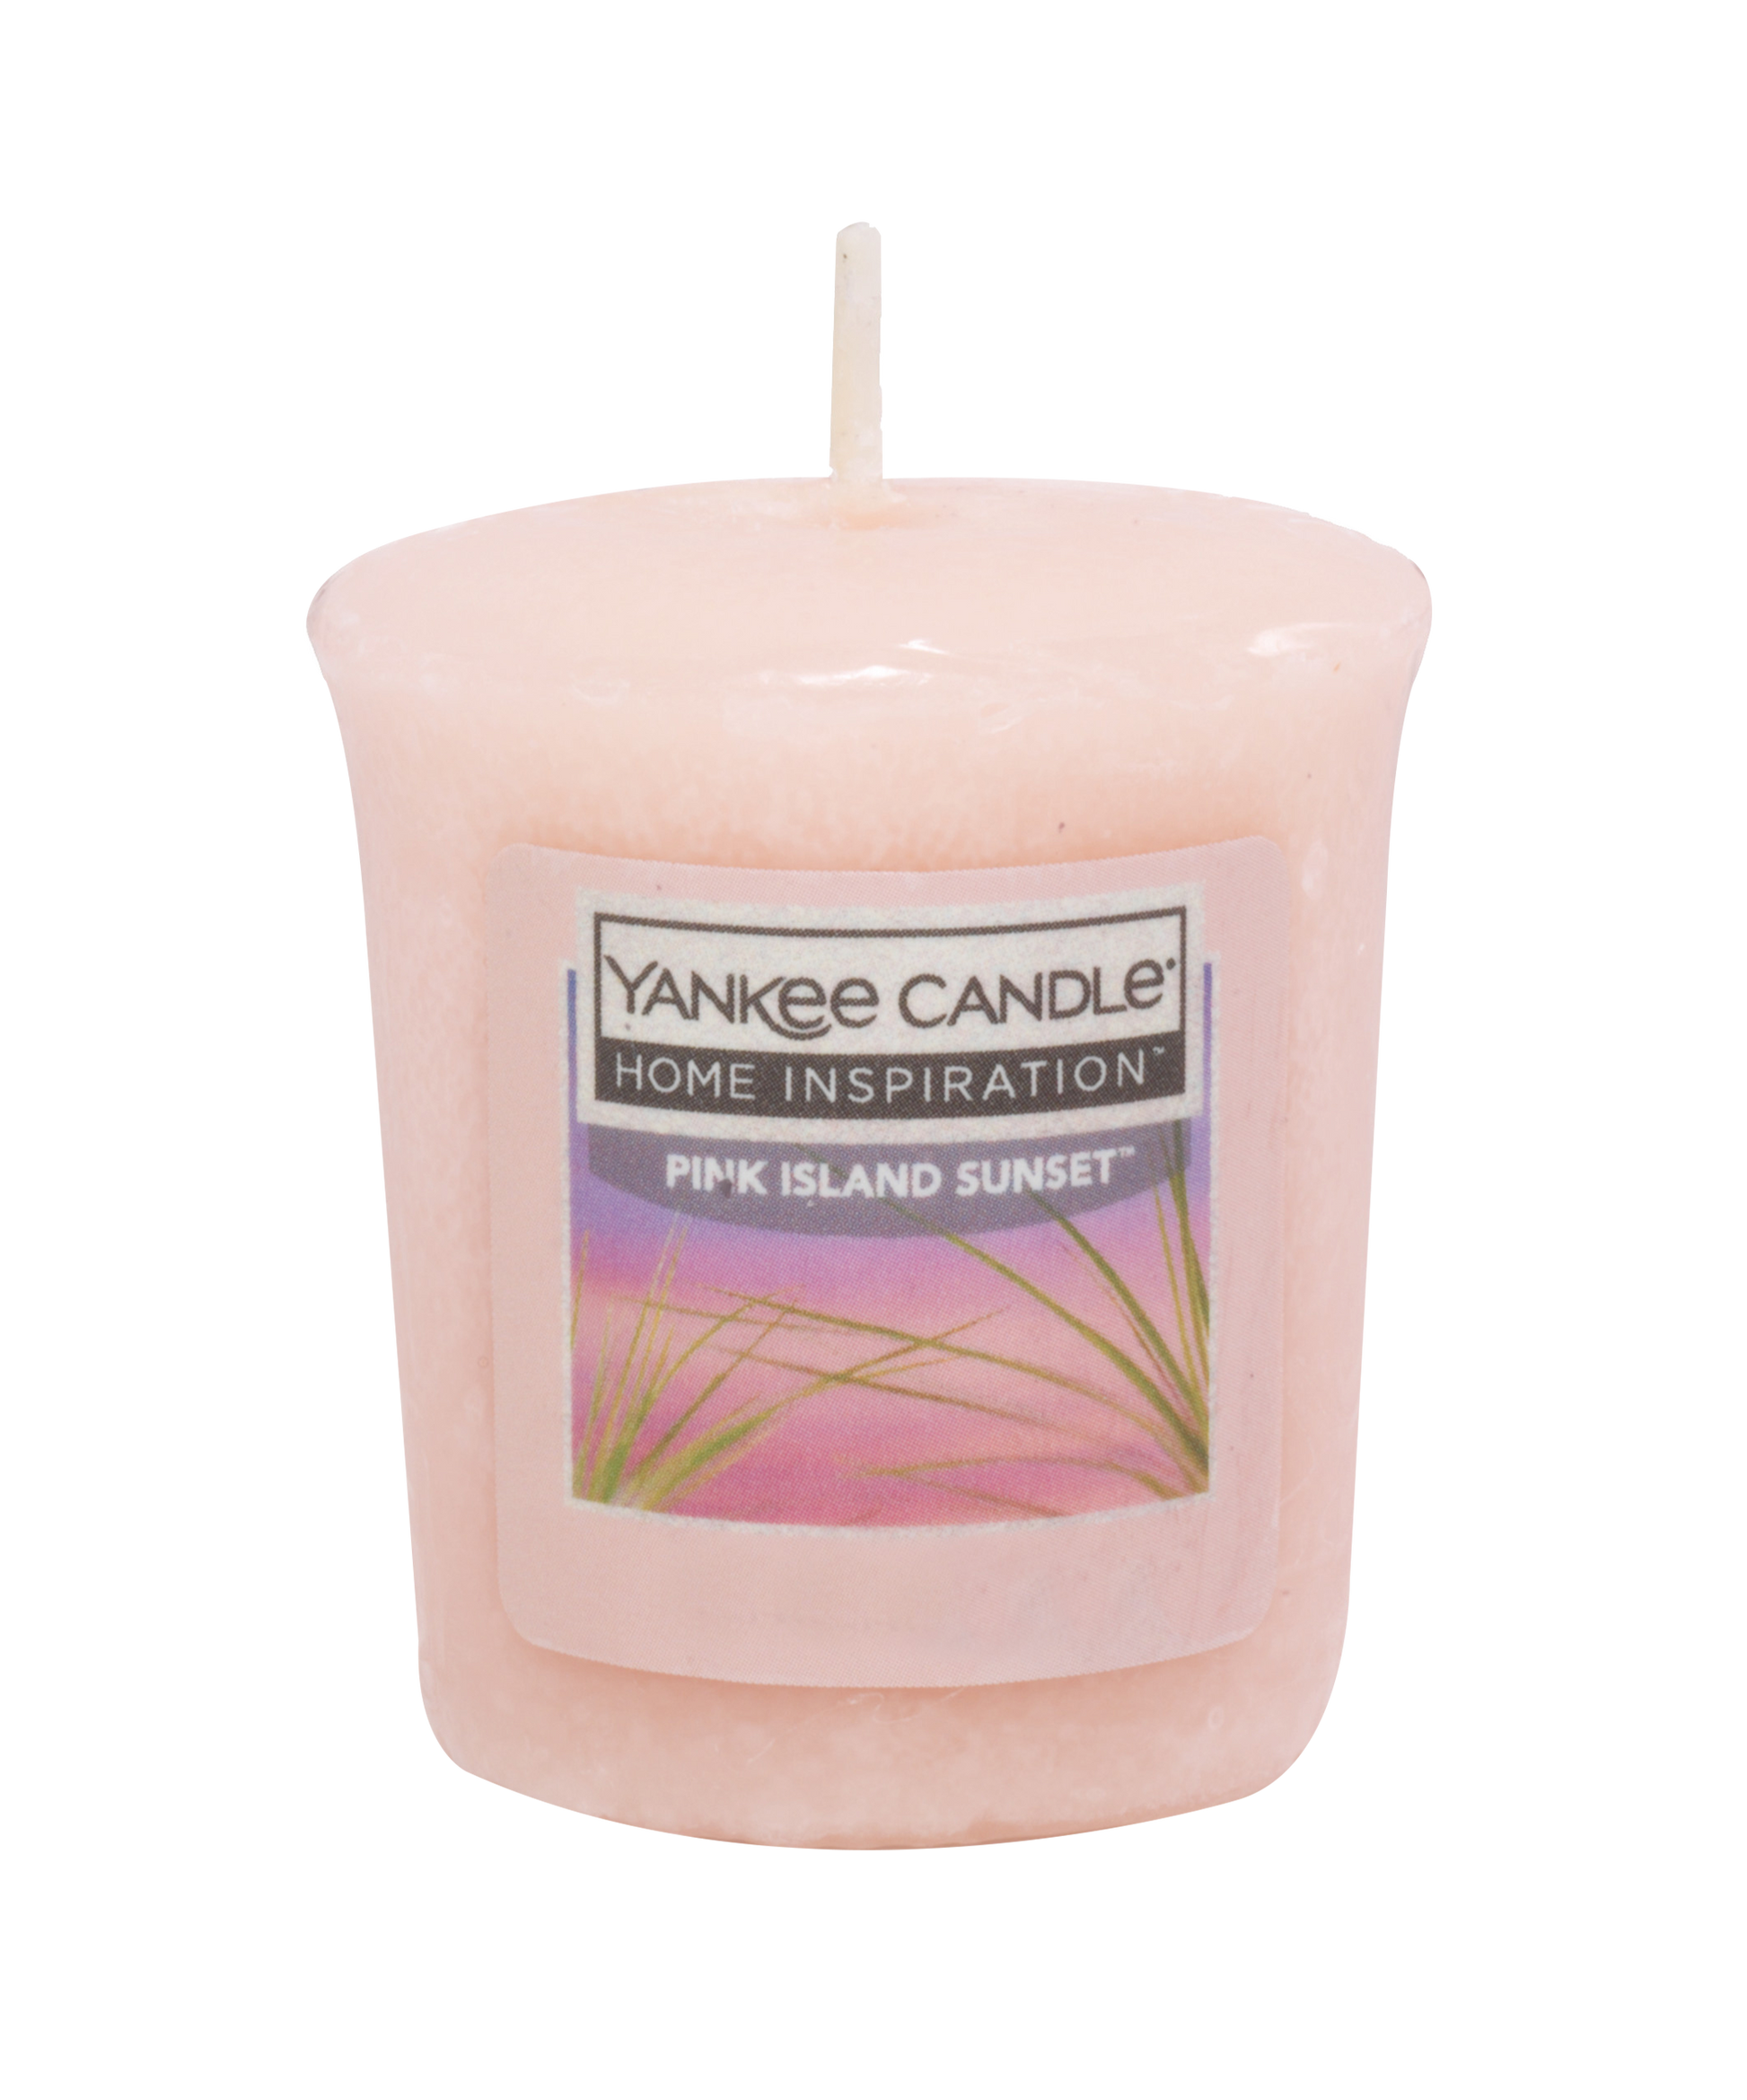 Pink Island Sunset Votive Tropical fruits and citrus of the Yankee Candle® Home Inspiration™ Candle will have you thinking of gentle trade winds and full, pink sunsets stretching the horizon.